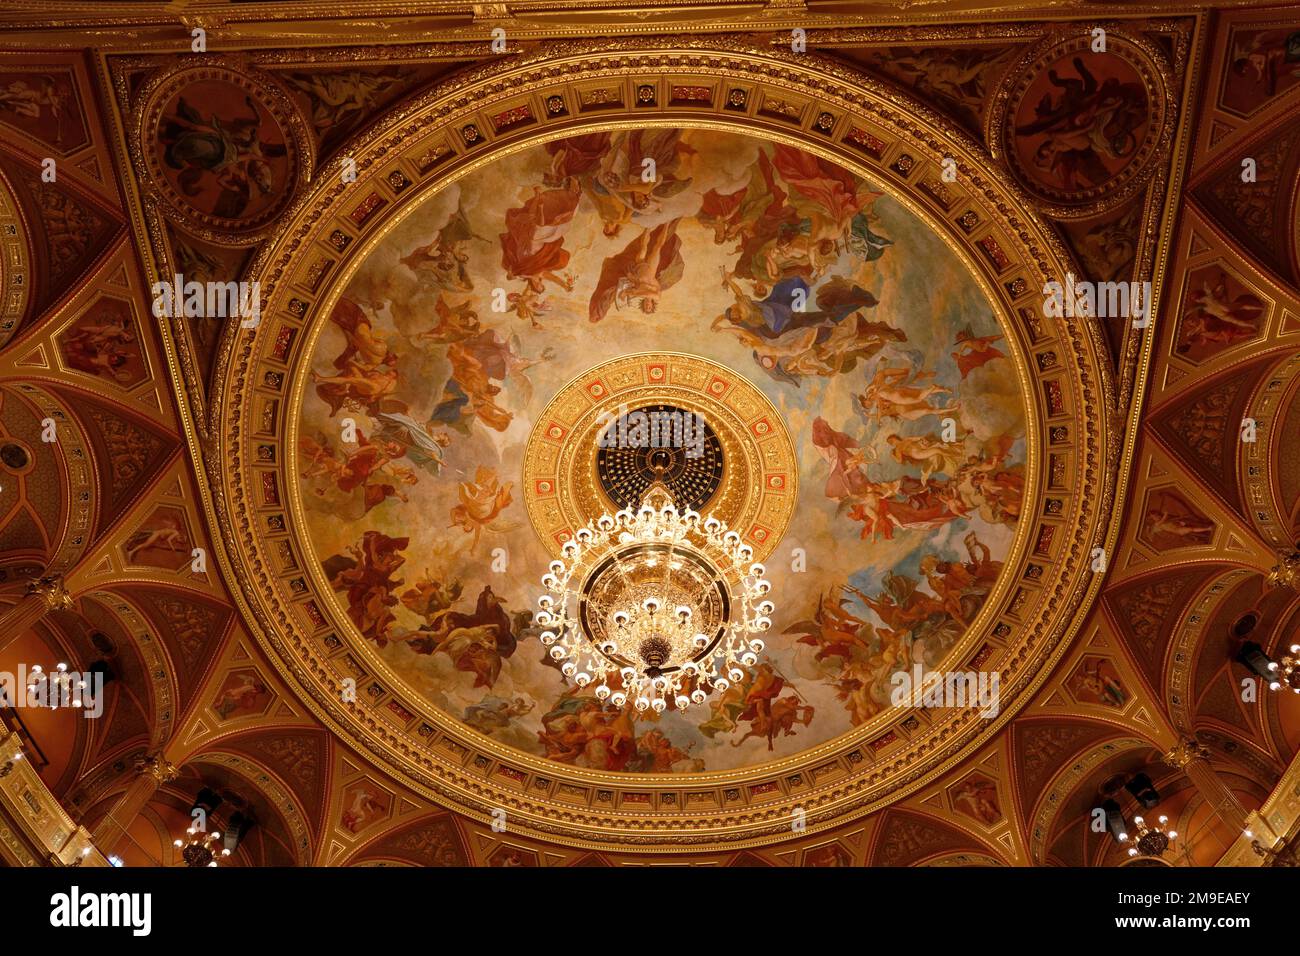 Opera, theatre room, ceiling, chandelier, interior view, VI. Budapest District, Budapest, Hungary Stock Photo